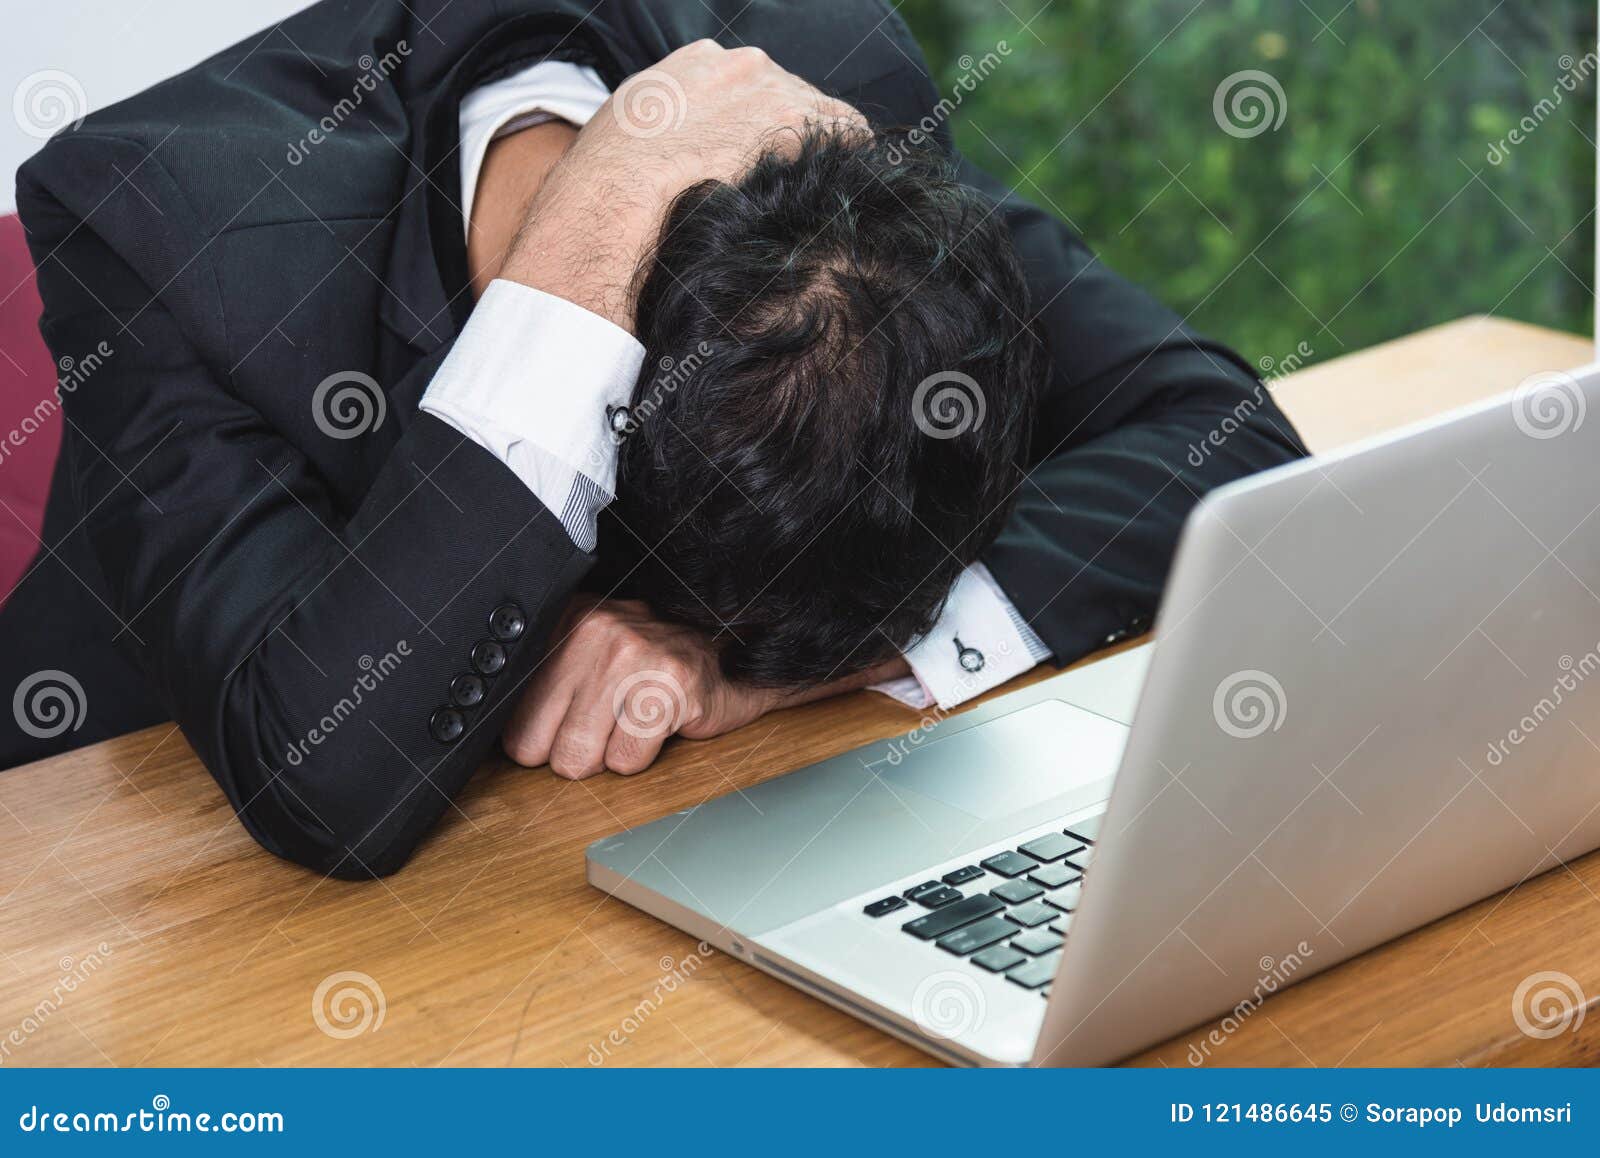 Business Man Unhappy Head Down On Laptop Computer Stock Image